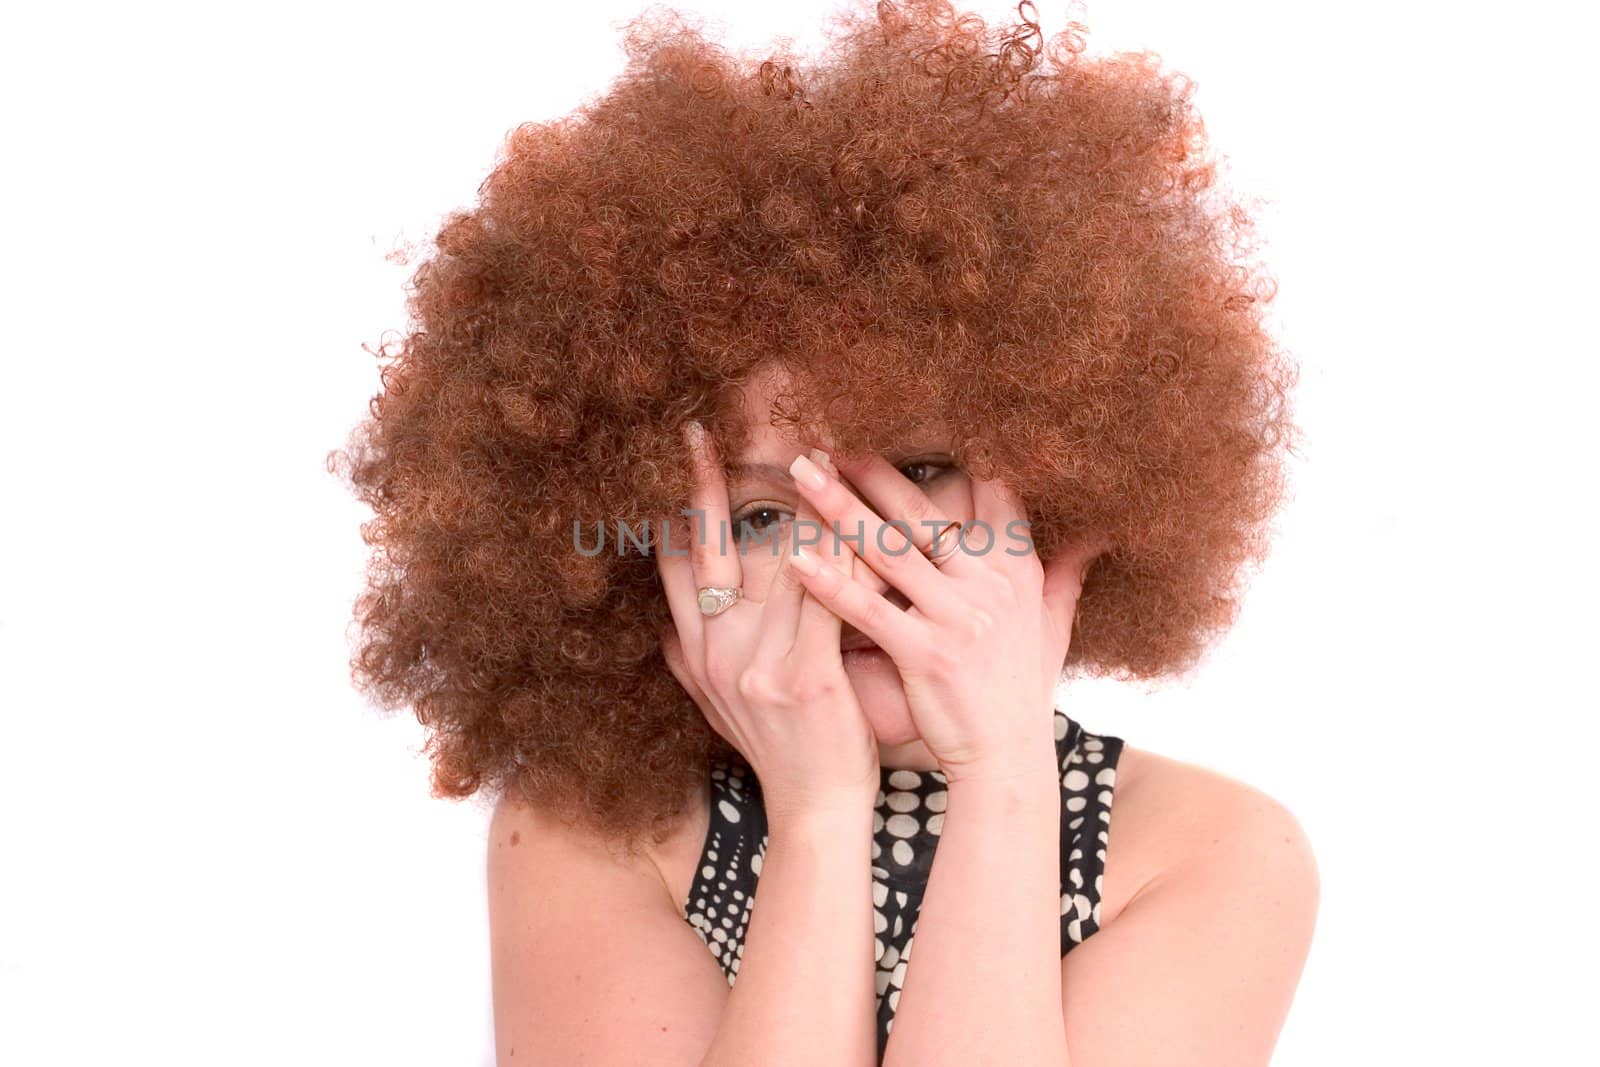 Pretty girl with red afro wig hiding her face in her hands